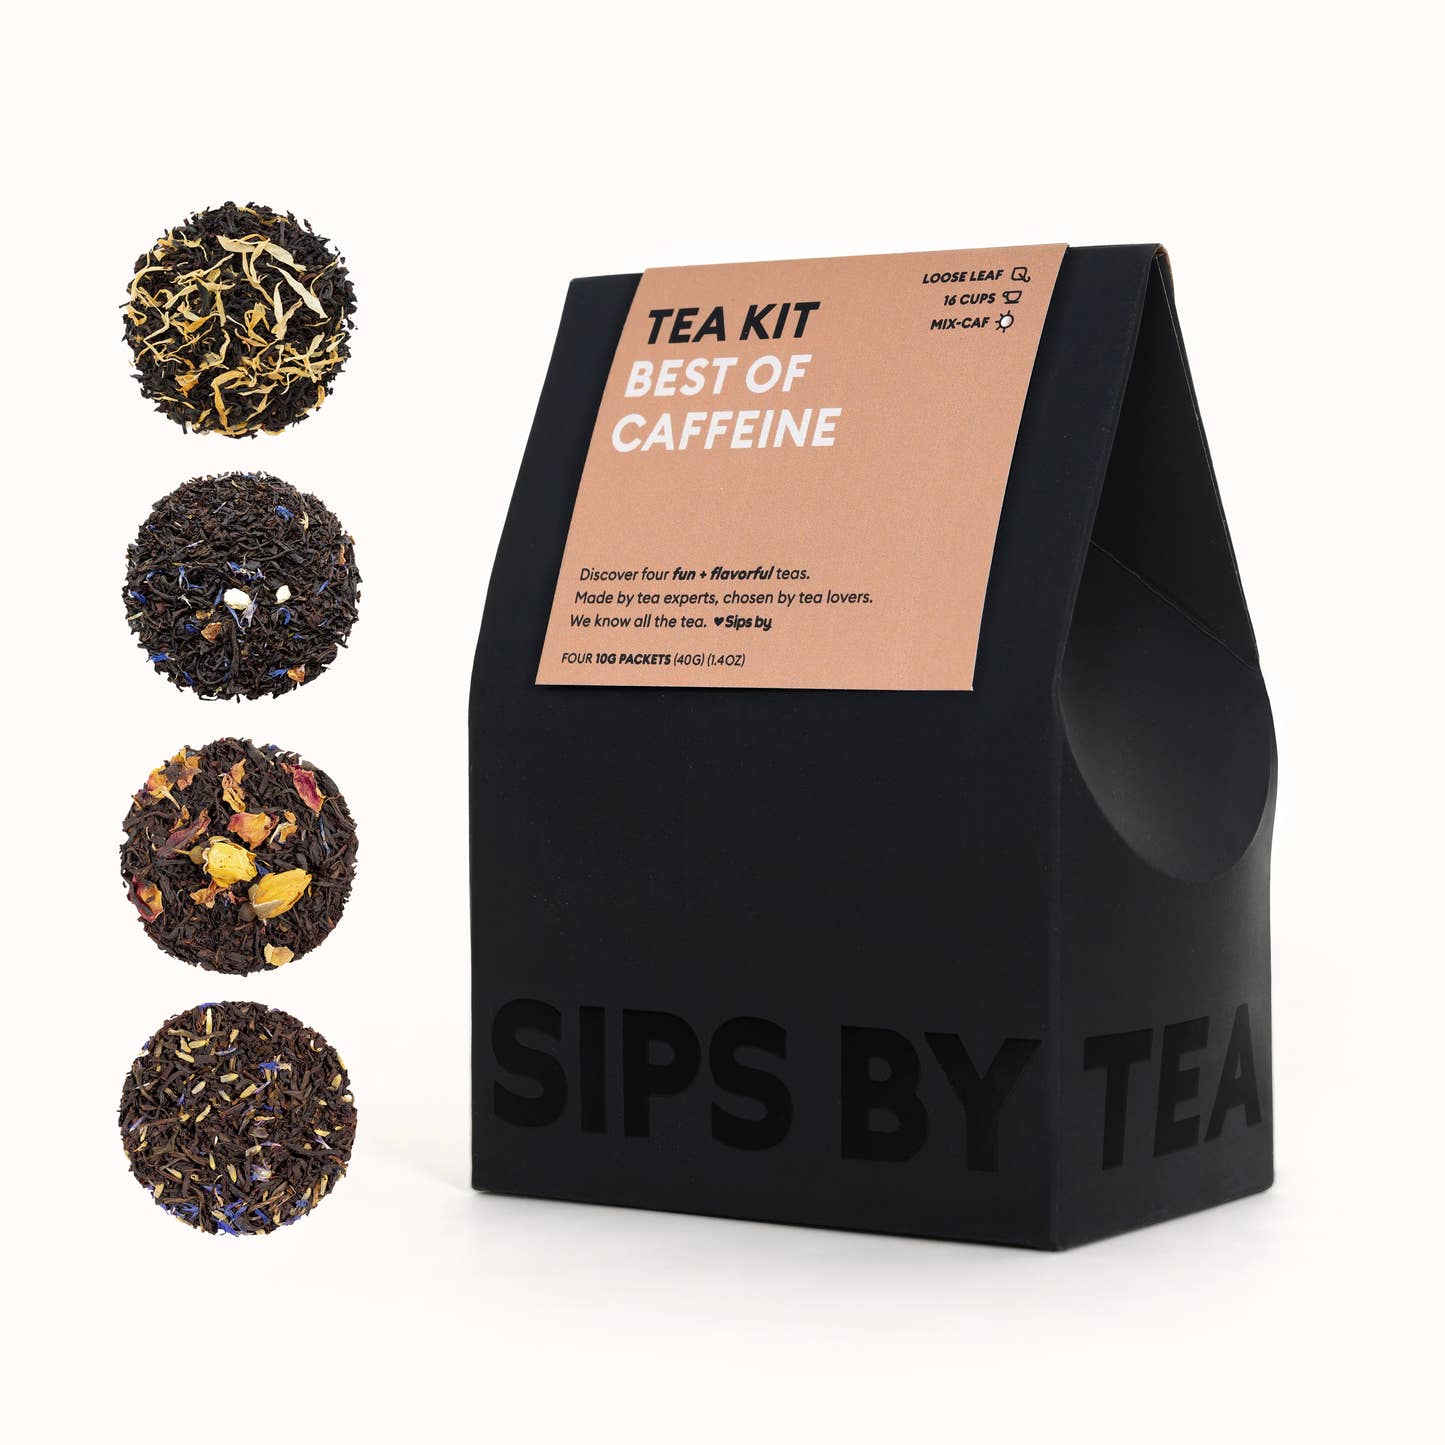 Black box with a terracotta topper that says "Best of Caffeine Tea Kit - Made by tea experts, chosen by tea lovers. We know all the tea. Love Sips by. Makes 16 Cups. Four 10G Packets (40G) (1.4OZ)"